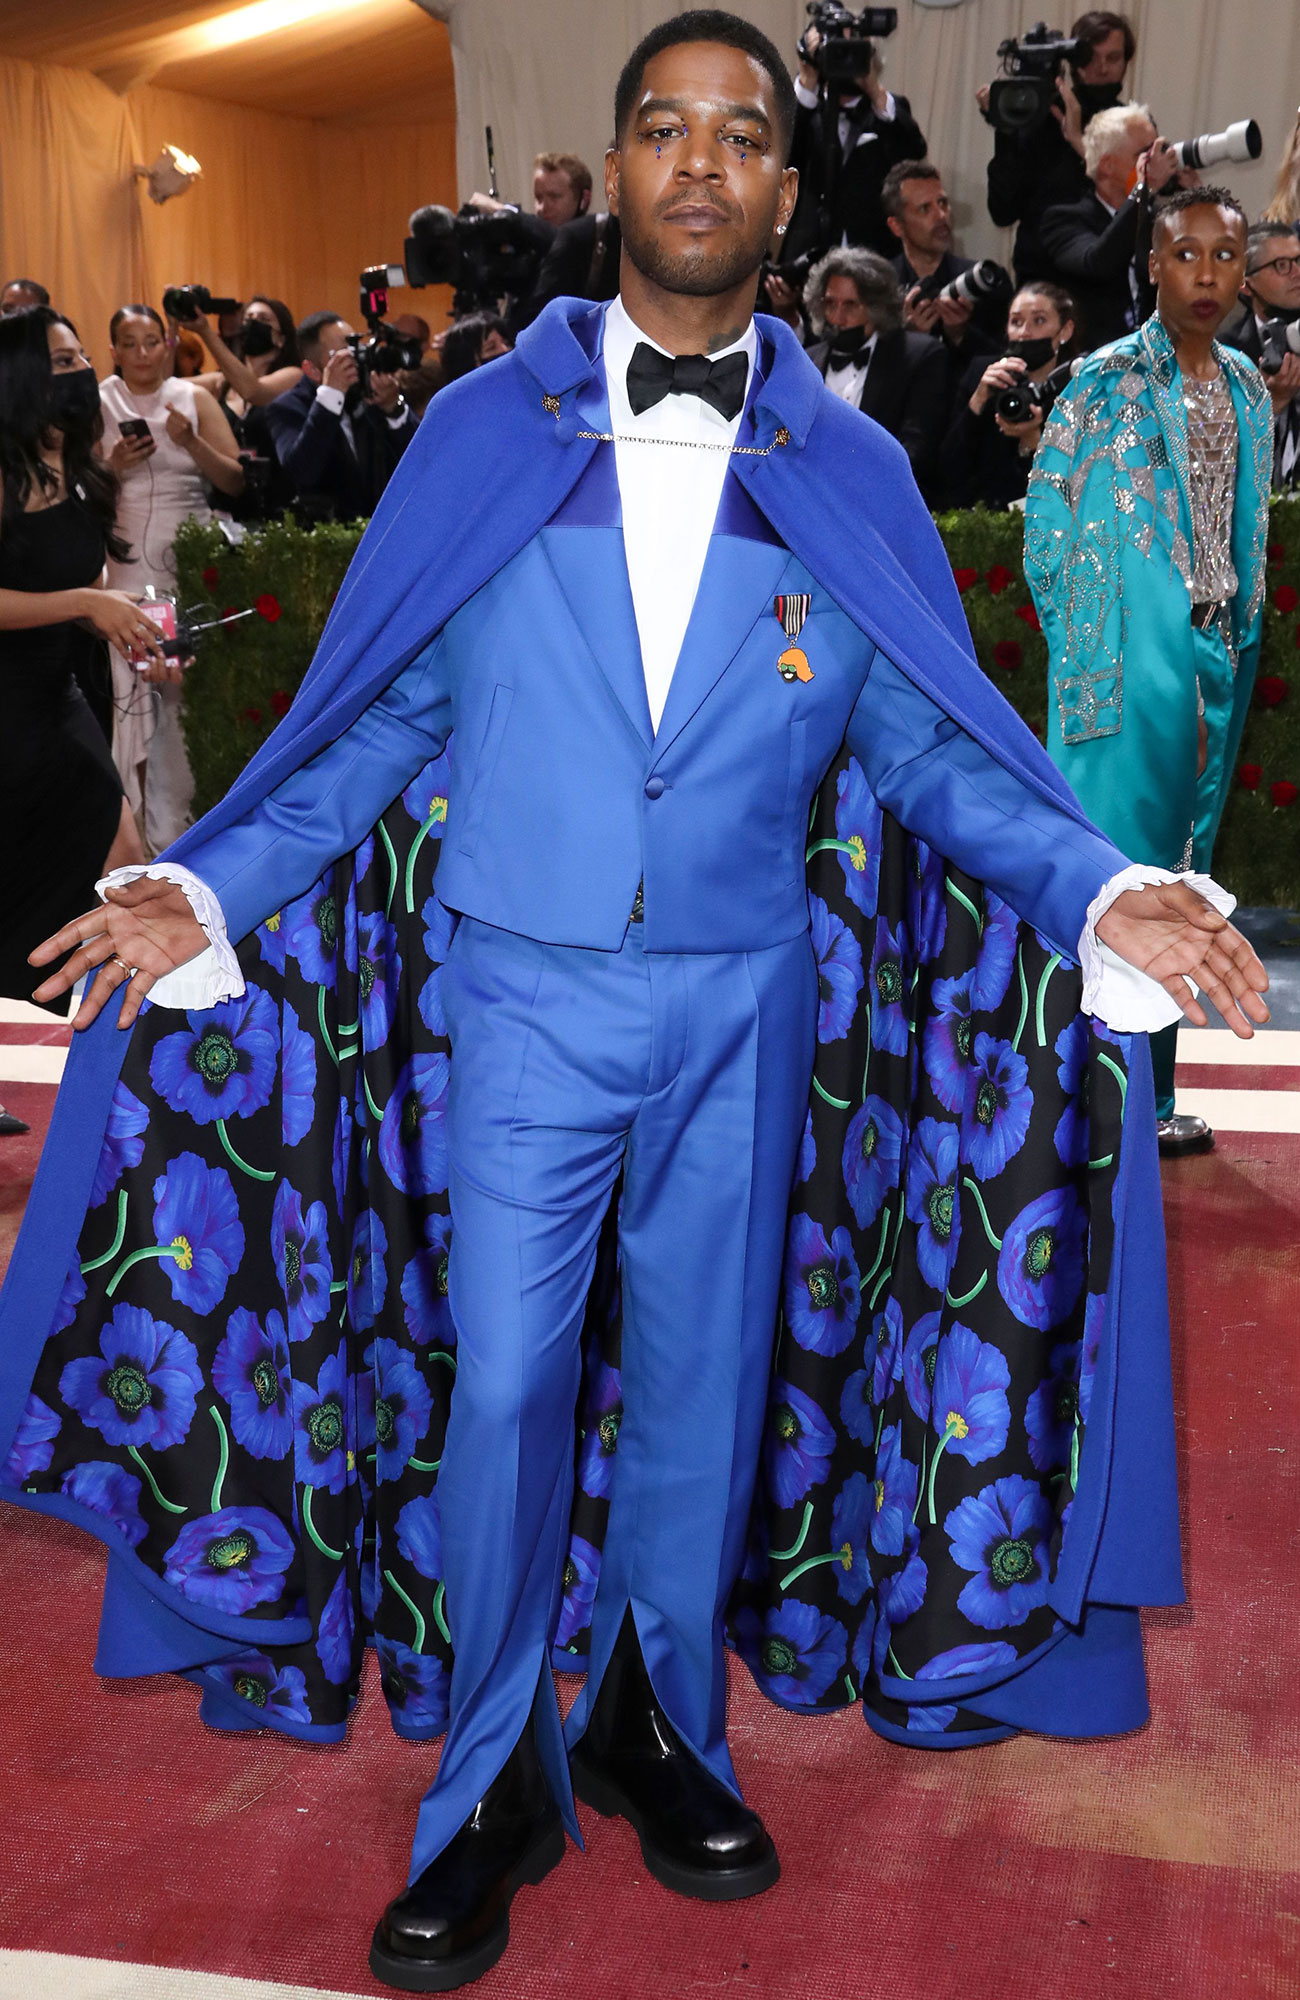 Met Gala 2022 Hottest Men in Tuxedos, Suits and More UsWeekly